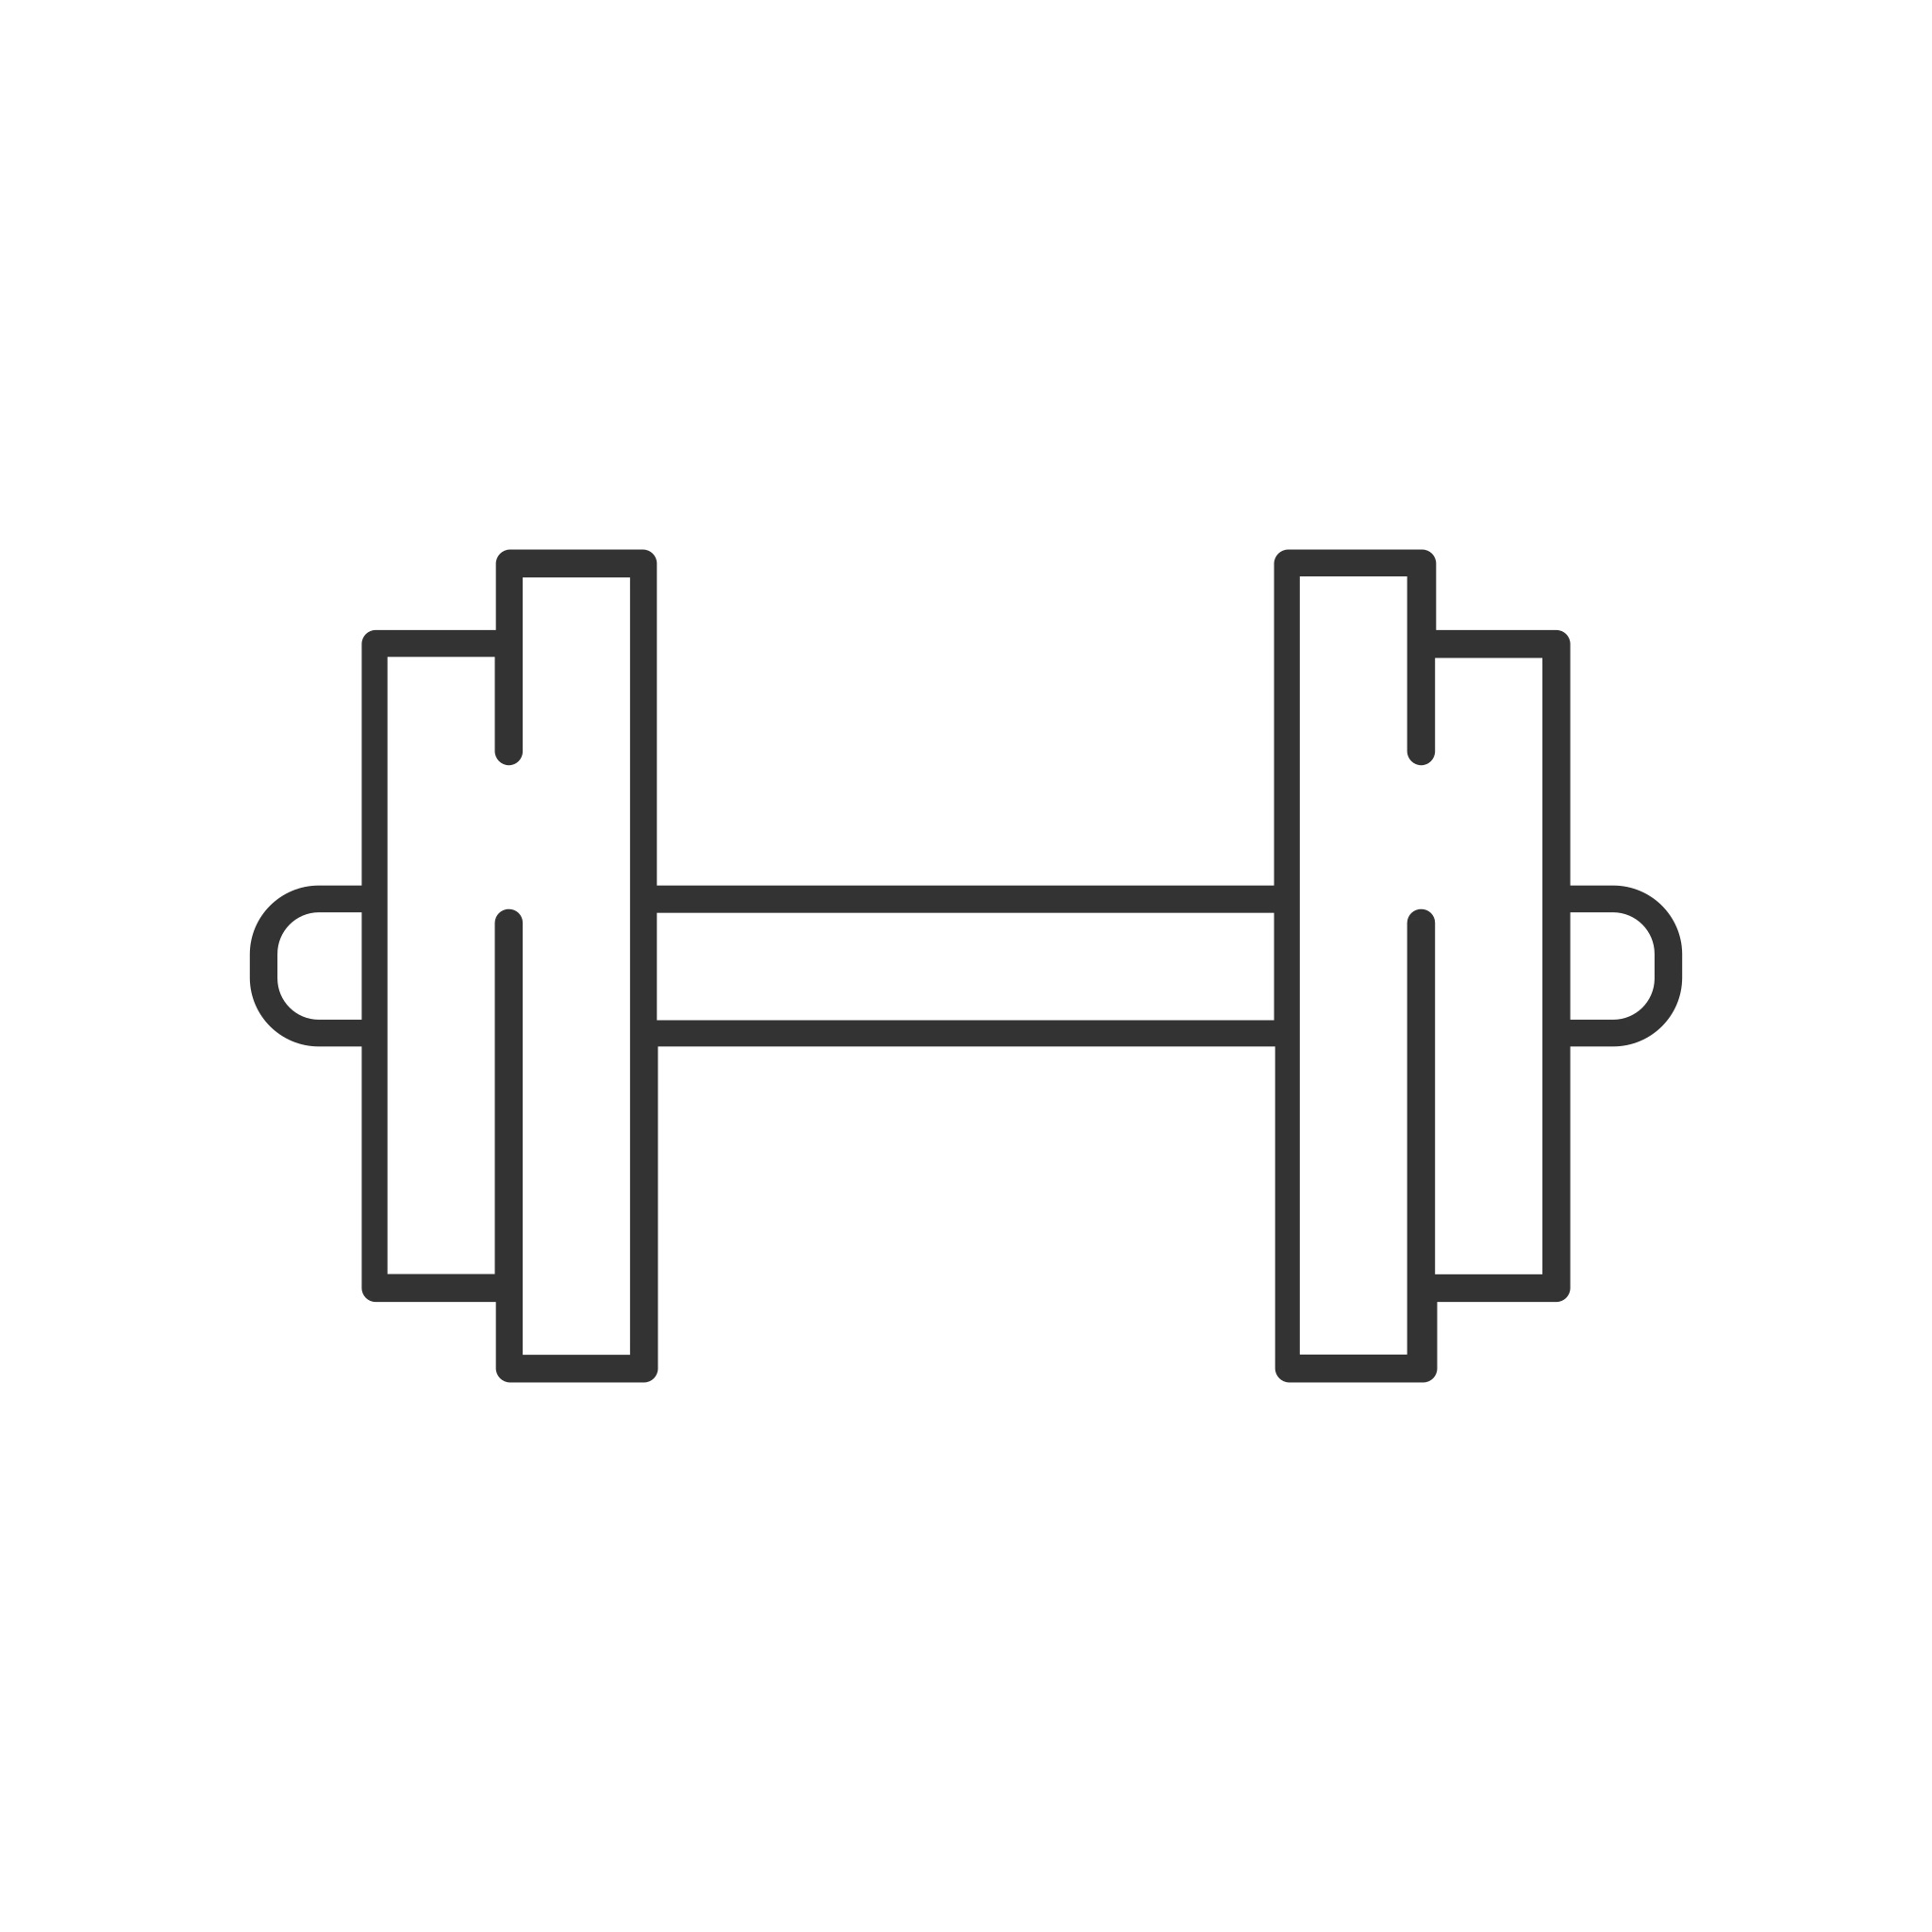 A barbell icon